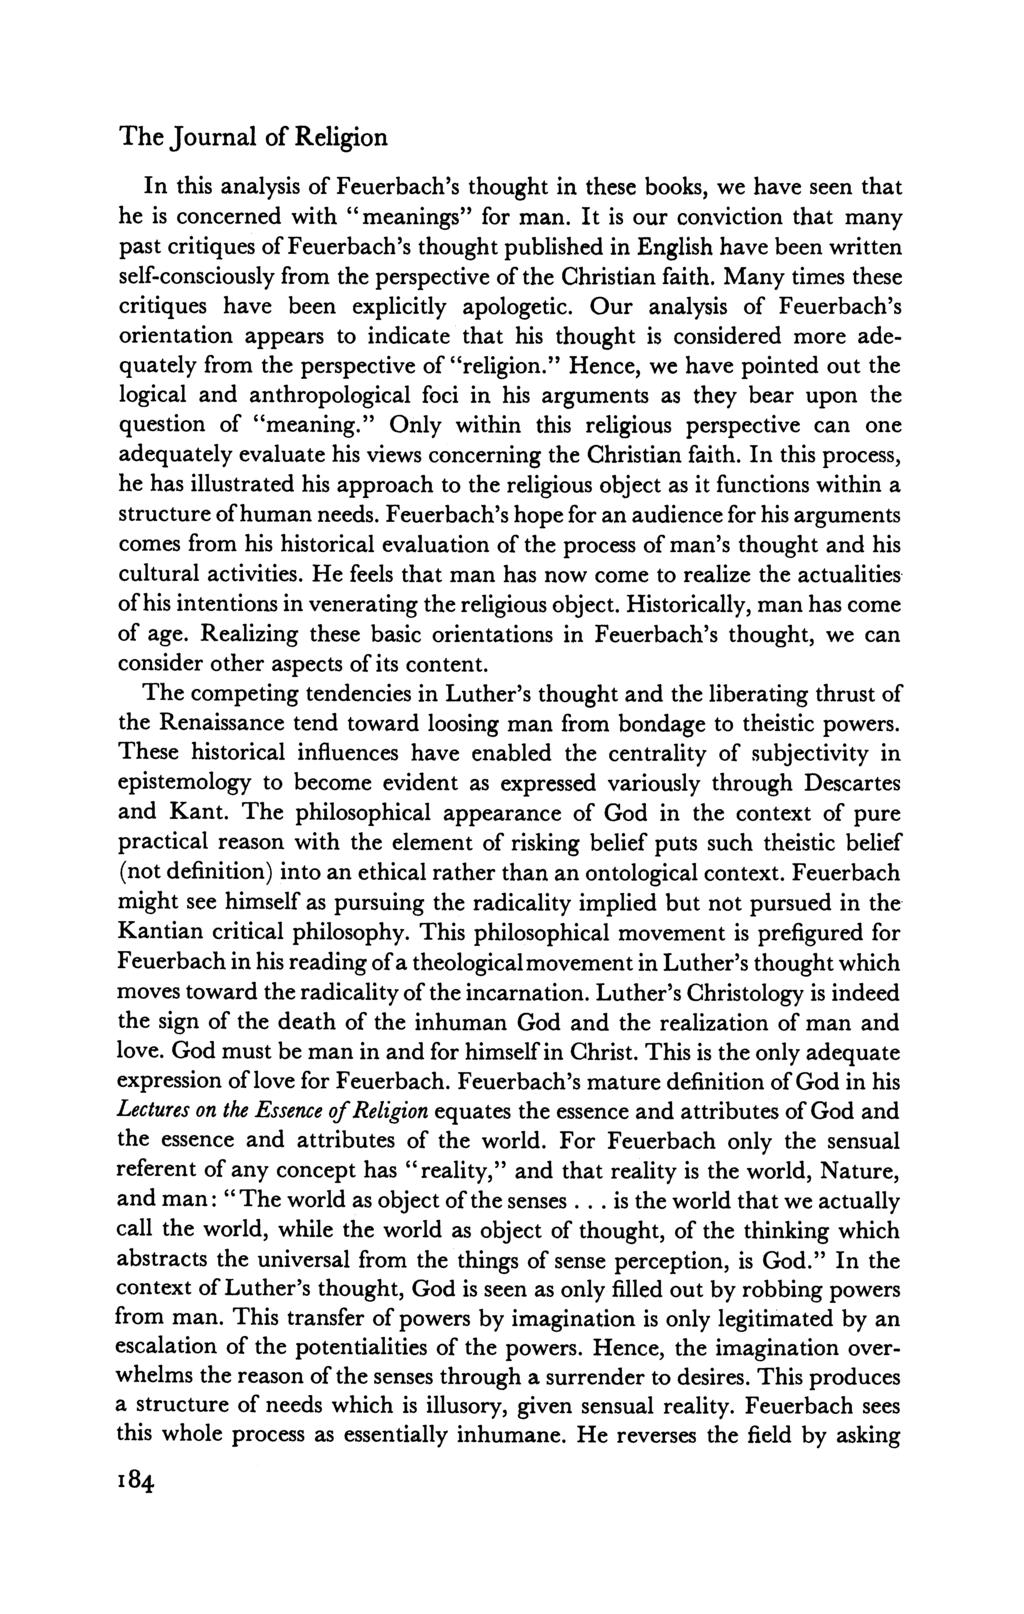 The Journal of Religion In this analysis of Feuerbach's thought in these books, we have seen that he is concerned with "meanings" for man.